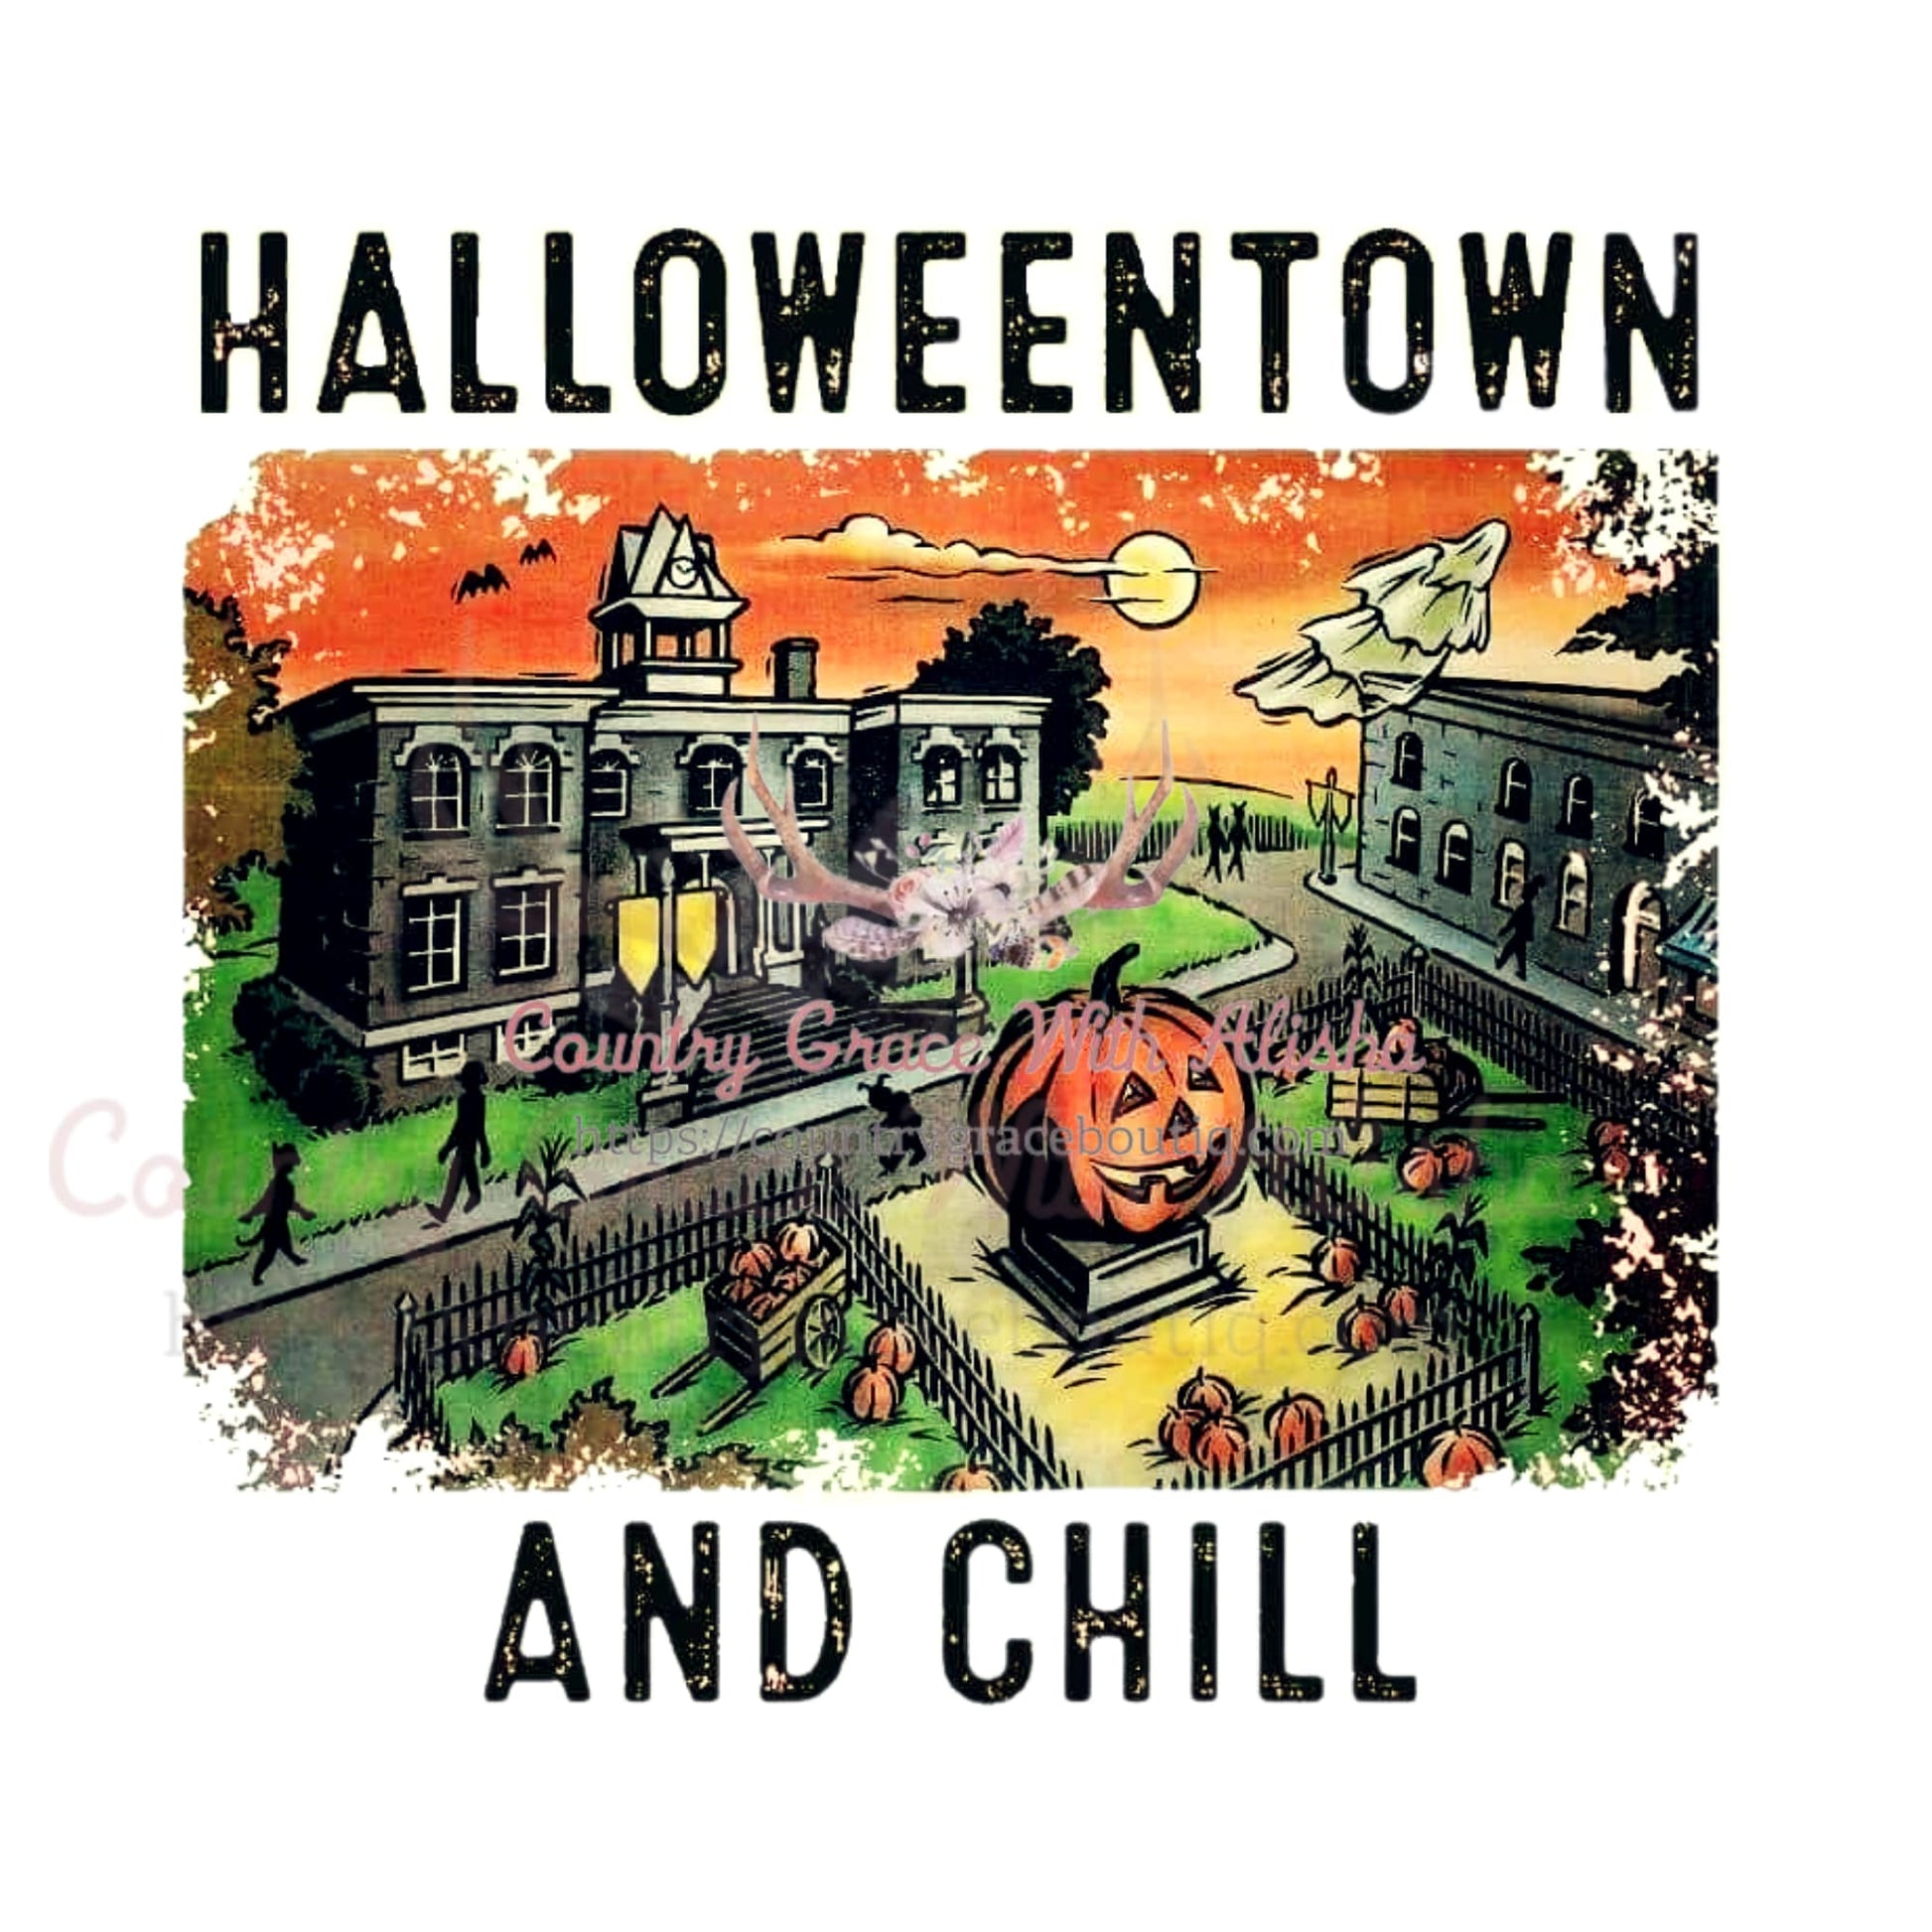 Halloween And Chill Sublimation Transfer - Sub $1.50 Country